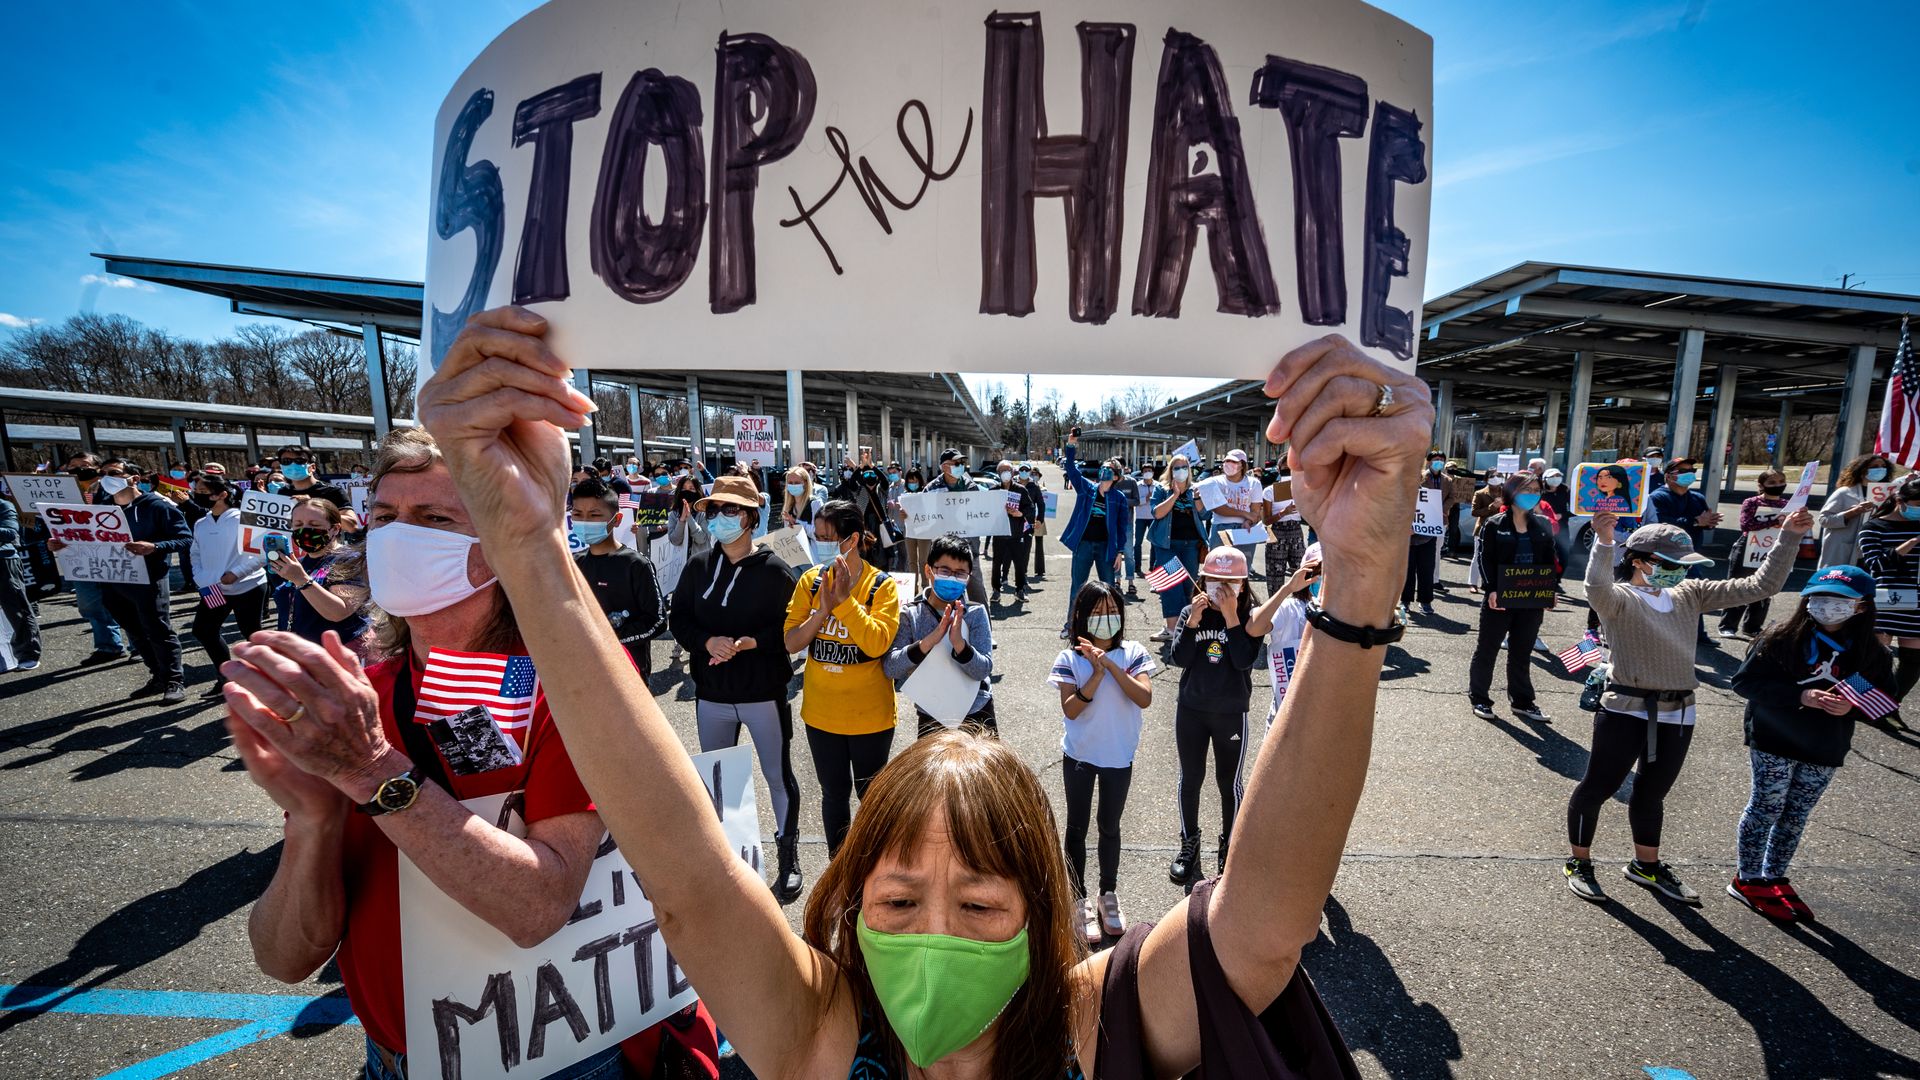 A woman is seen holding a sign during a recent protest against Asian American hate crimes.